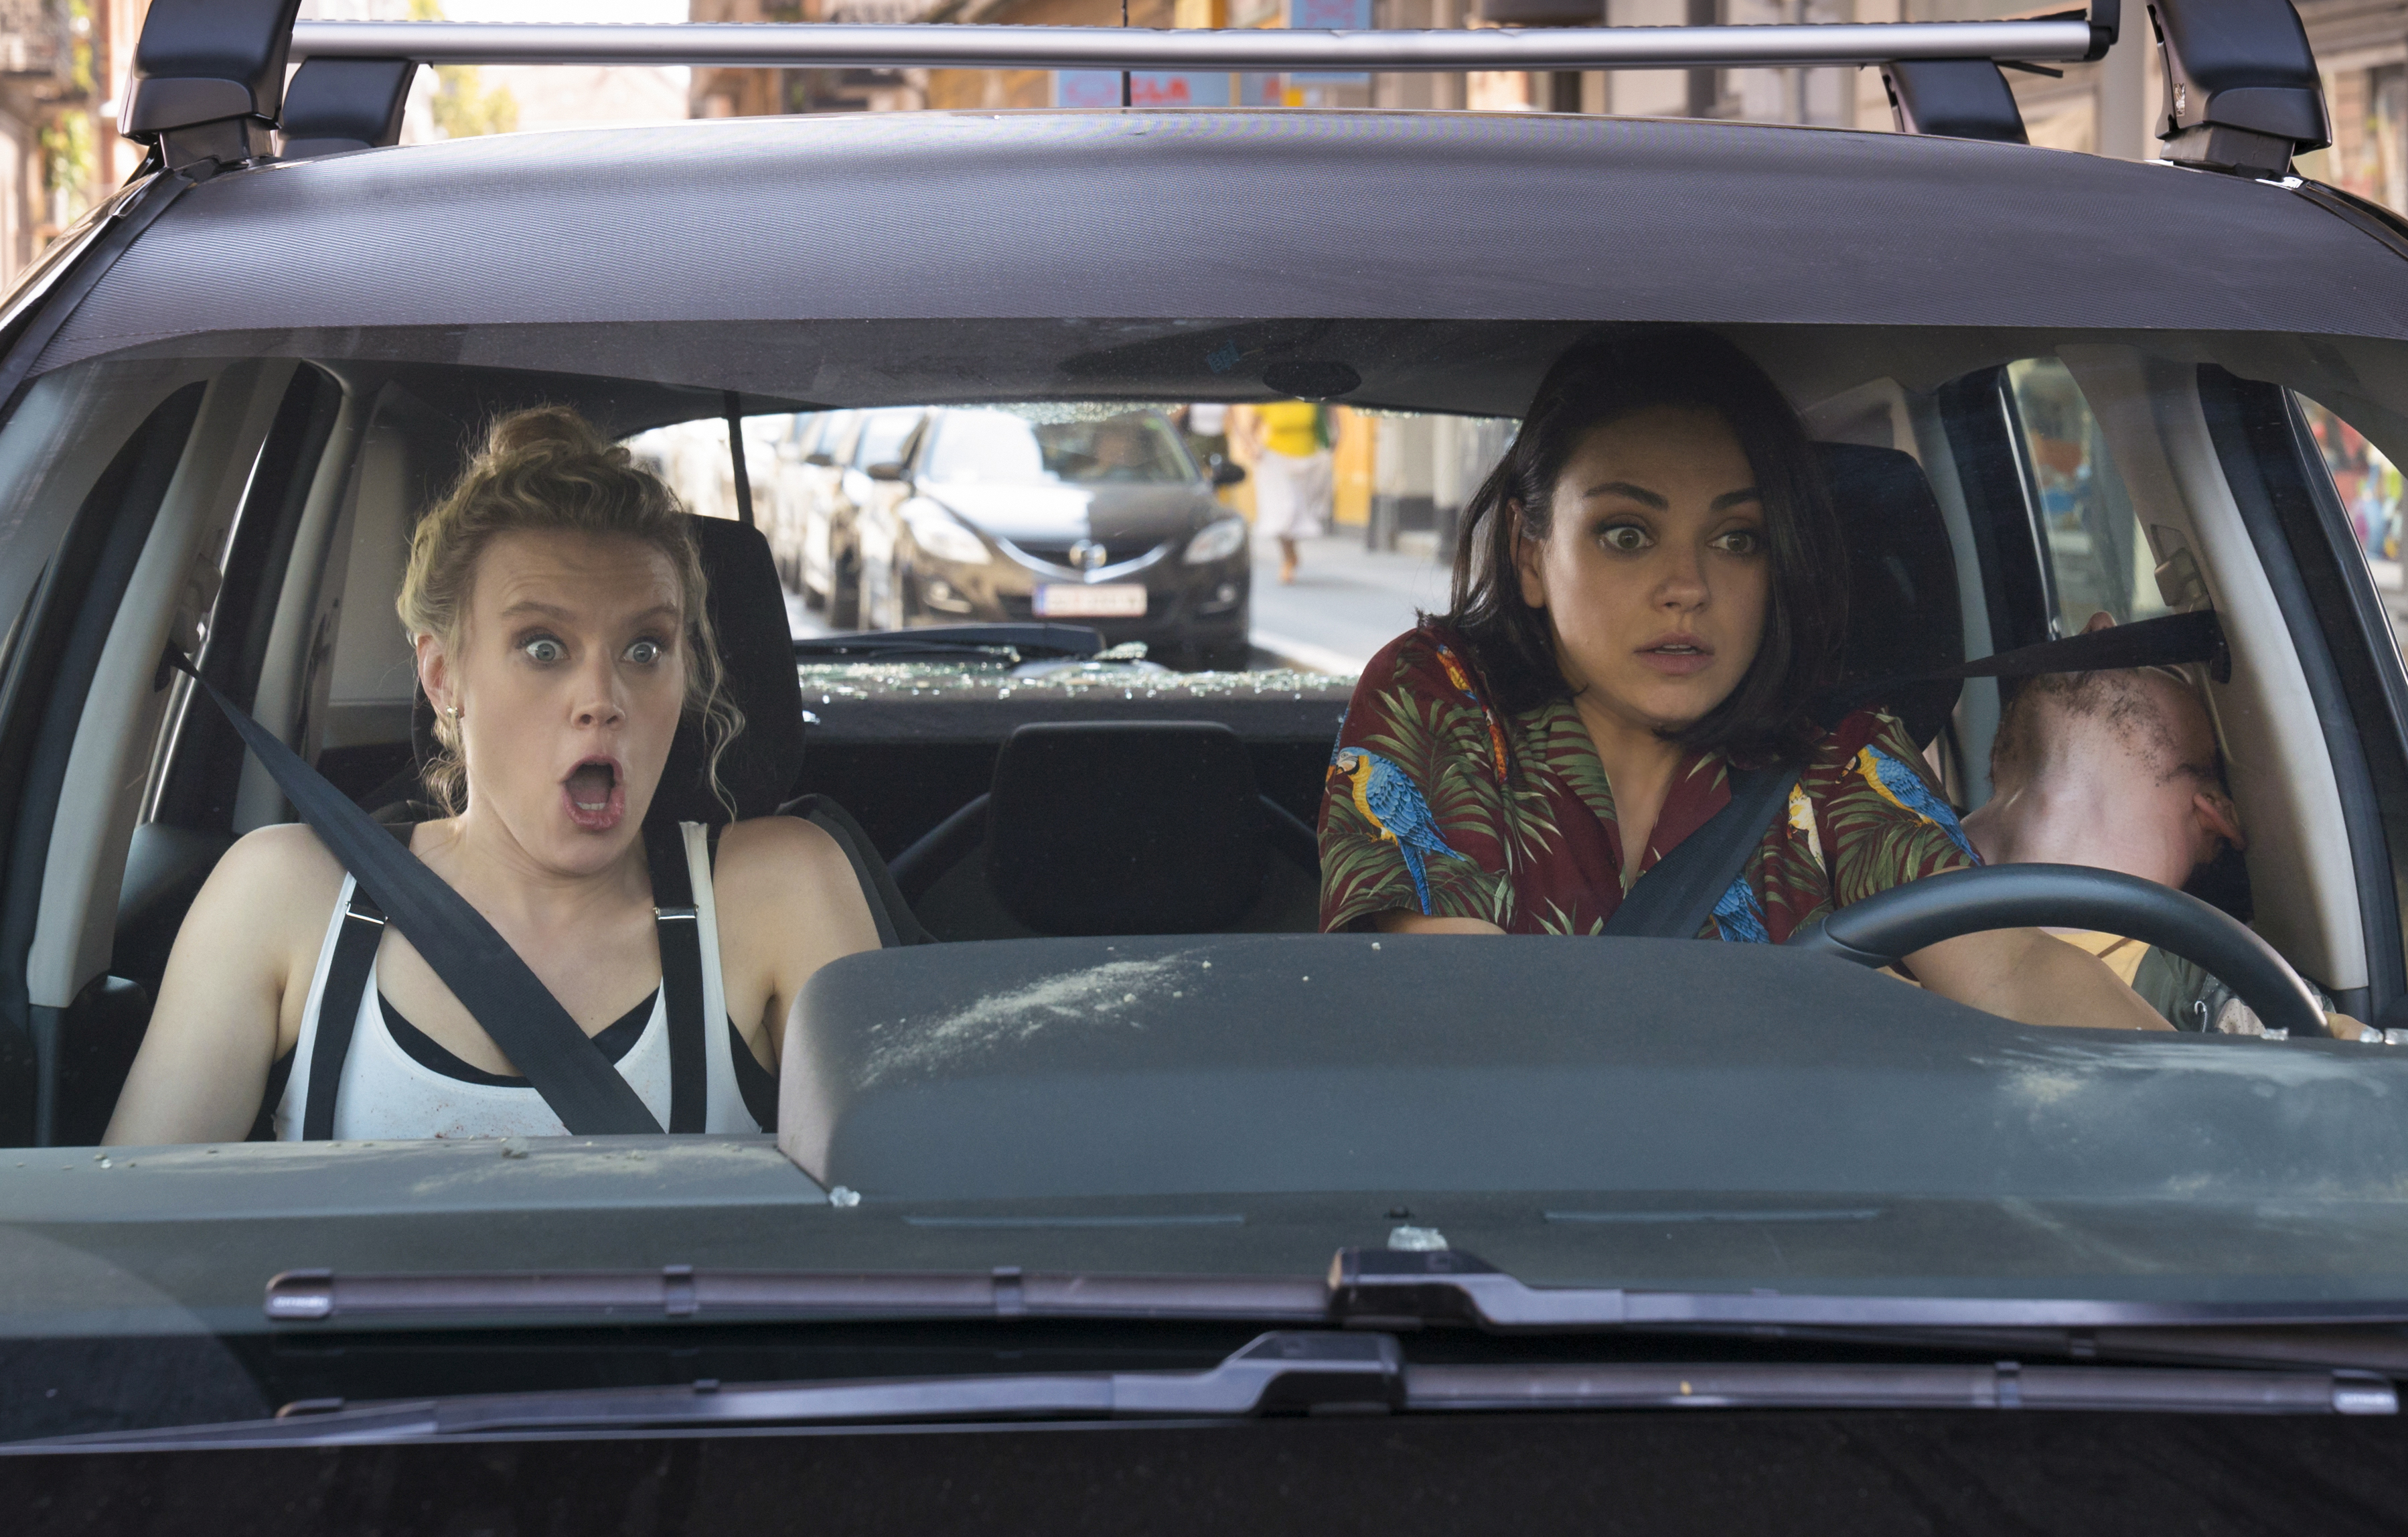  Kate McKinnon as &quot;Morgan&quot; and Mila Kunis as &quot;Audrey&quot; in THE SPY WHO DUMPED ME. Photo by Hopper Stone/SMPSP 